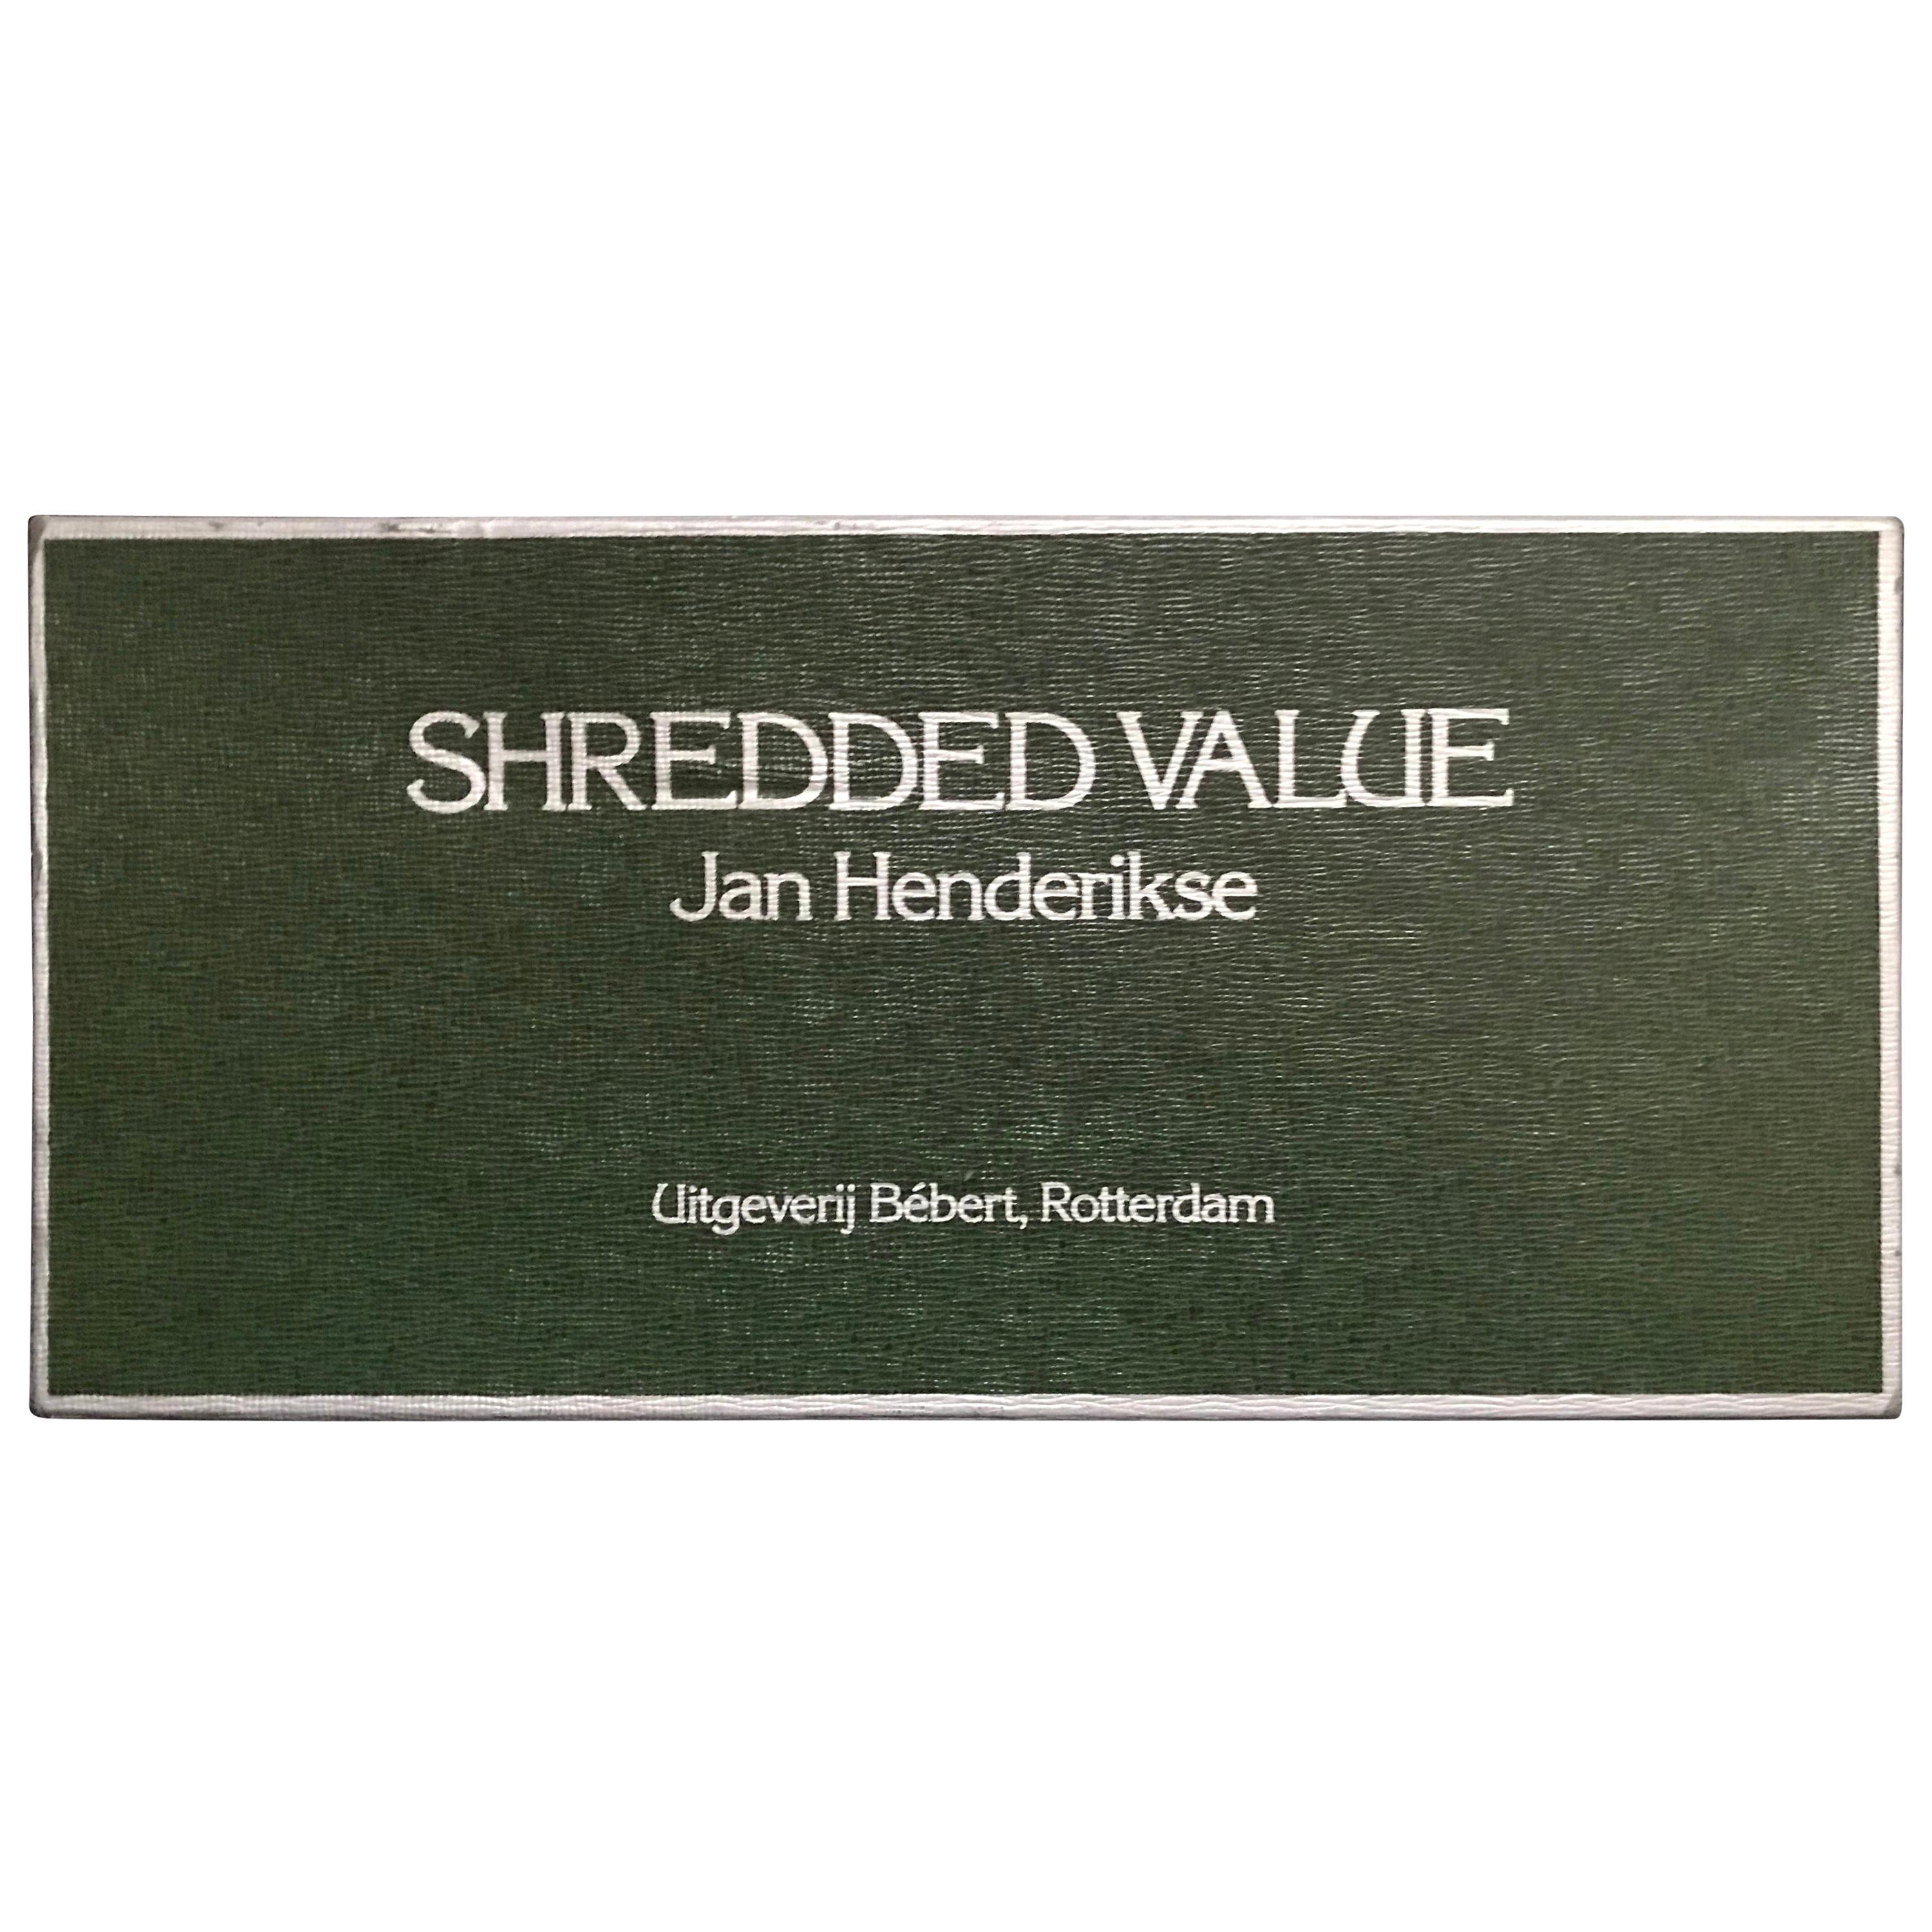 'Shreddded Value' by Jan Hendrikse (1937), Dutch 0-Art Artist.
Artistic box with shredded Dollar bills accompanying booklet.
Complete in original box. Booklet is numbered: 274 from 500.